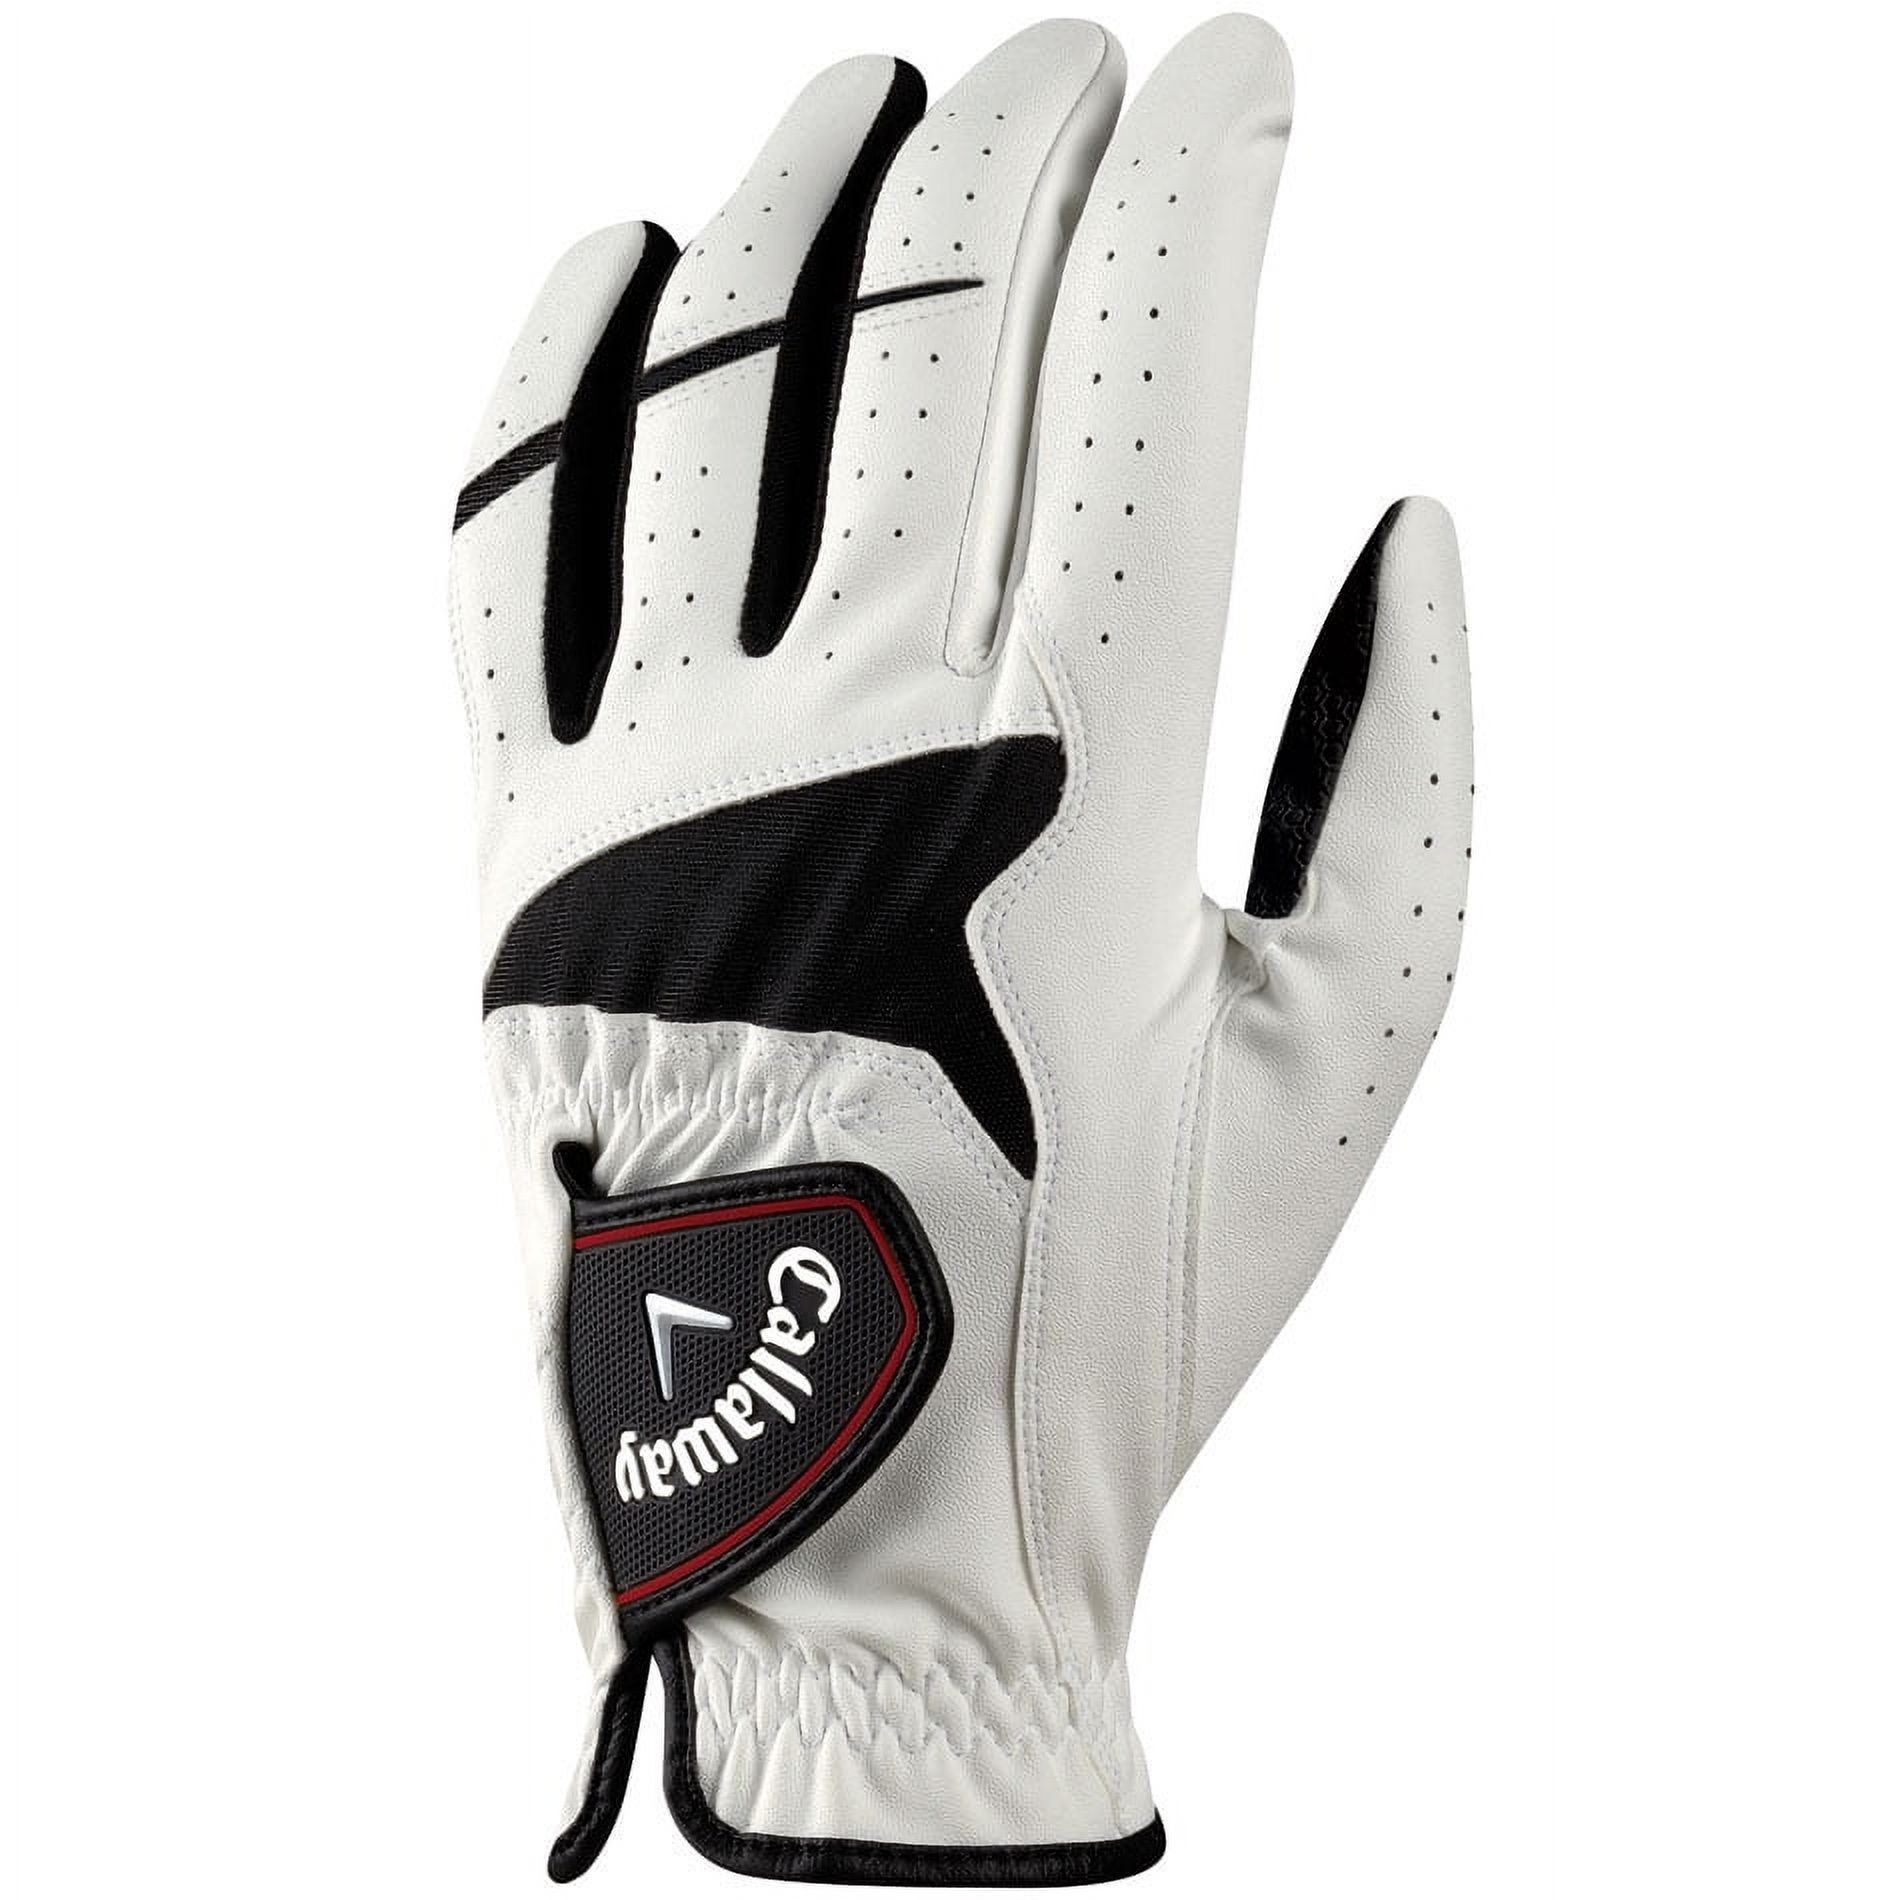 Callaway XXT Xtreme Golf Glove, 2 Pack, White (Worn on Left Hand) - image 3 of 3